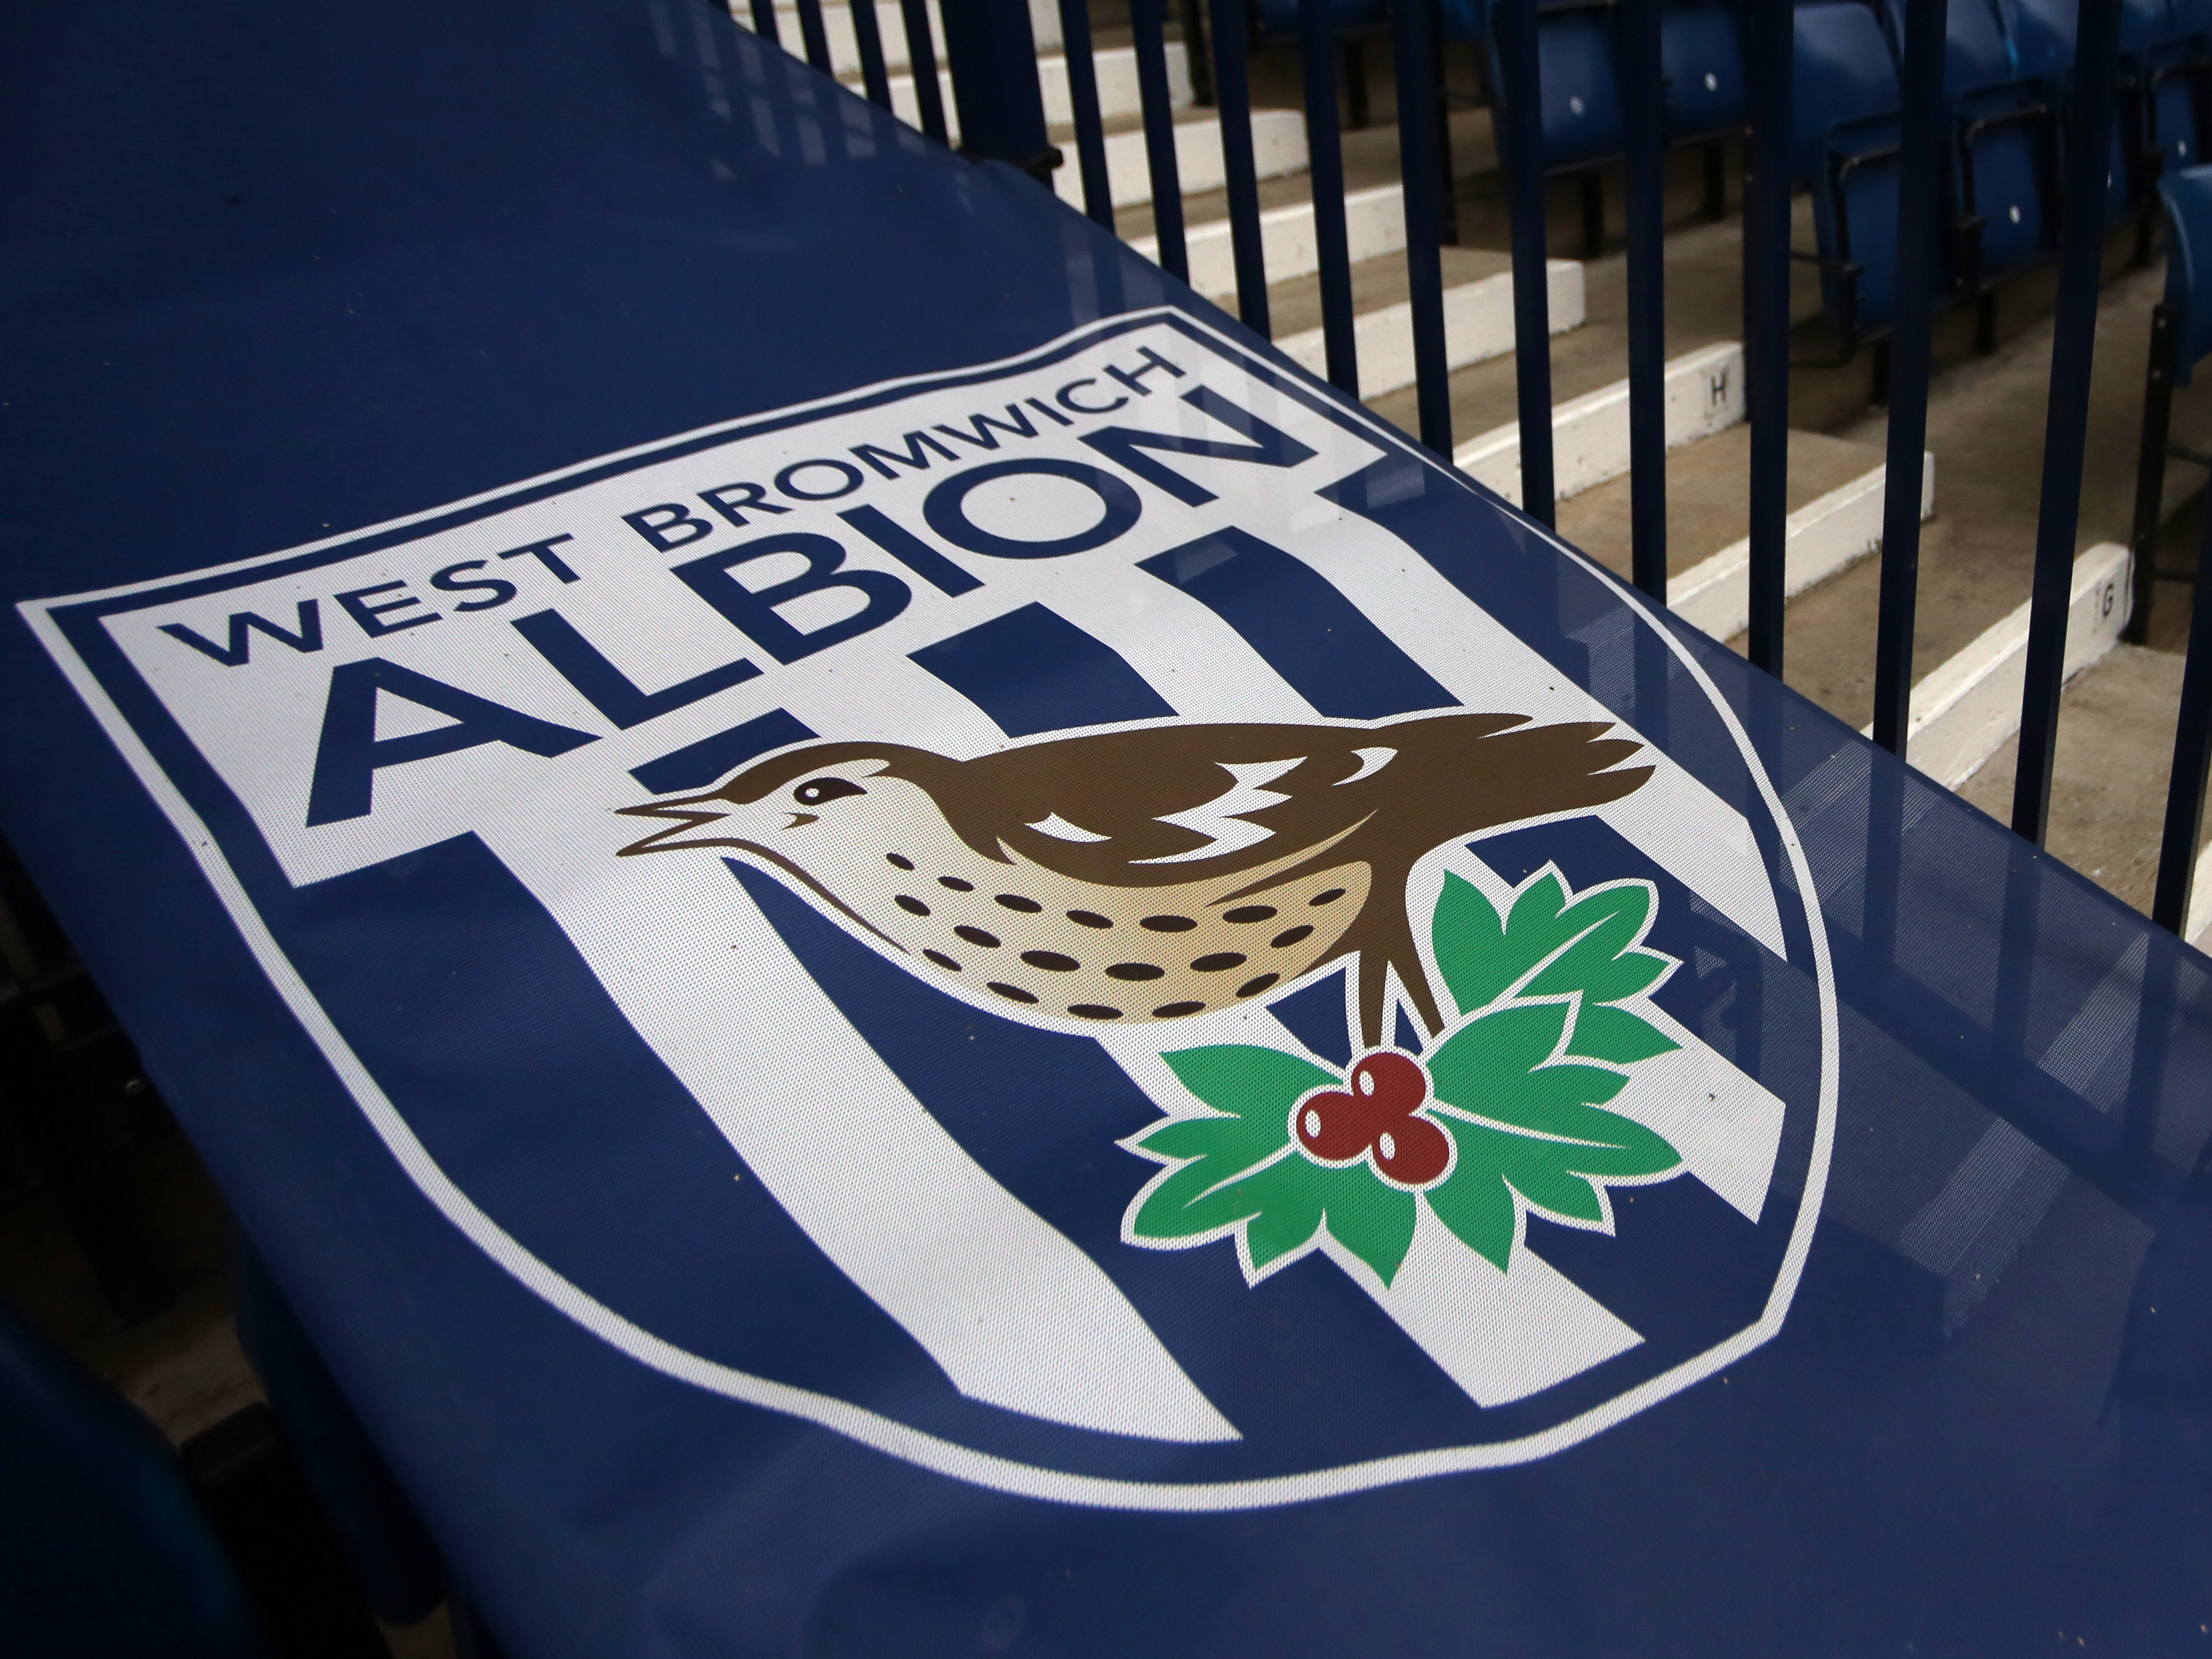 A WBA badge on netting over the seats in the stand at The Hawthorns